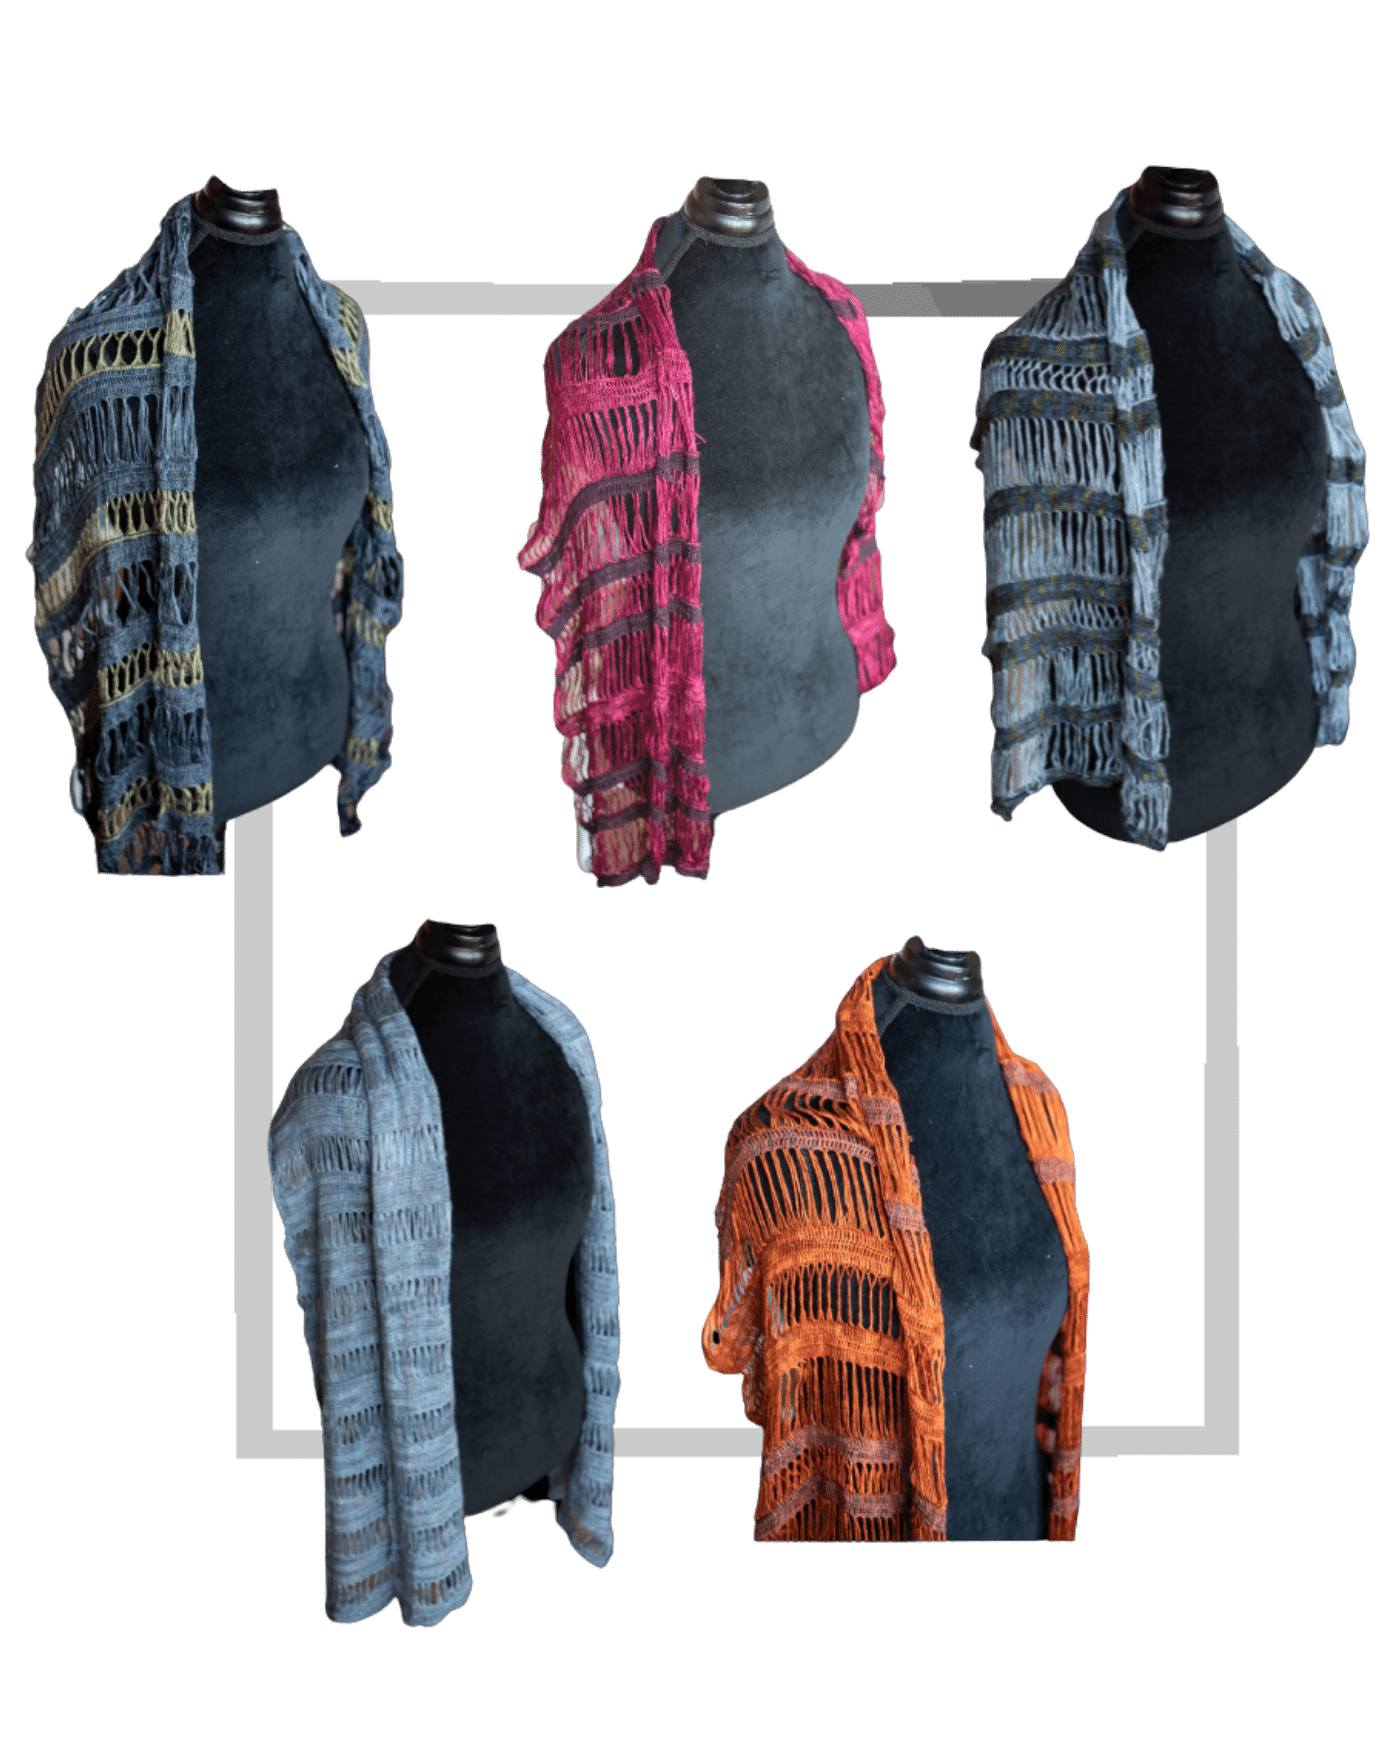 Photo shows five different images of silk broomstick lace wraps arranged on a mannequin against a gray gingham background.